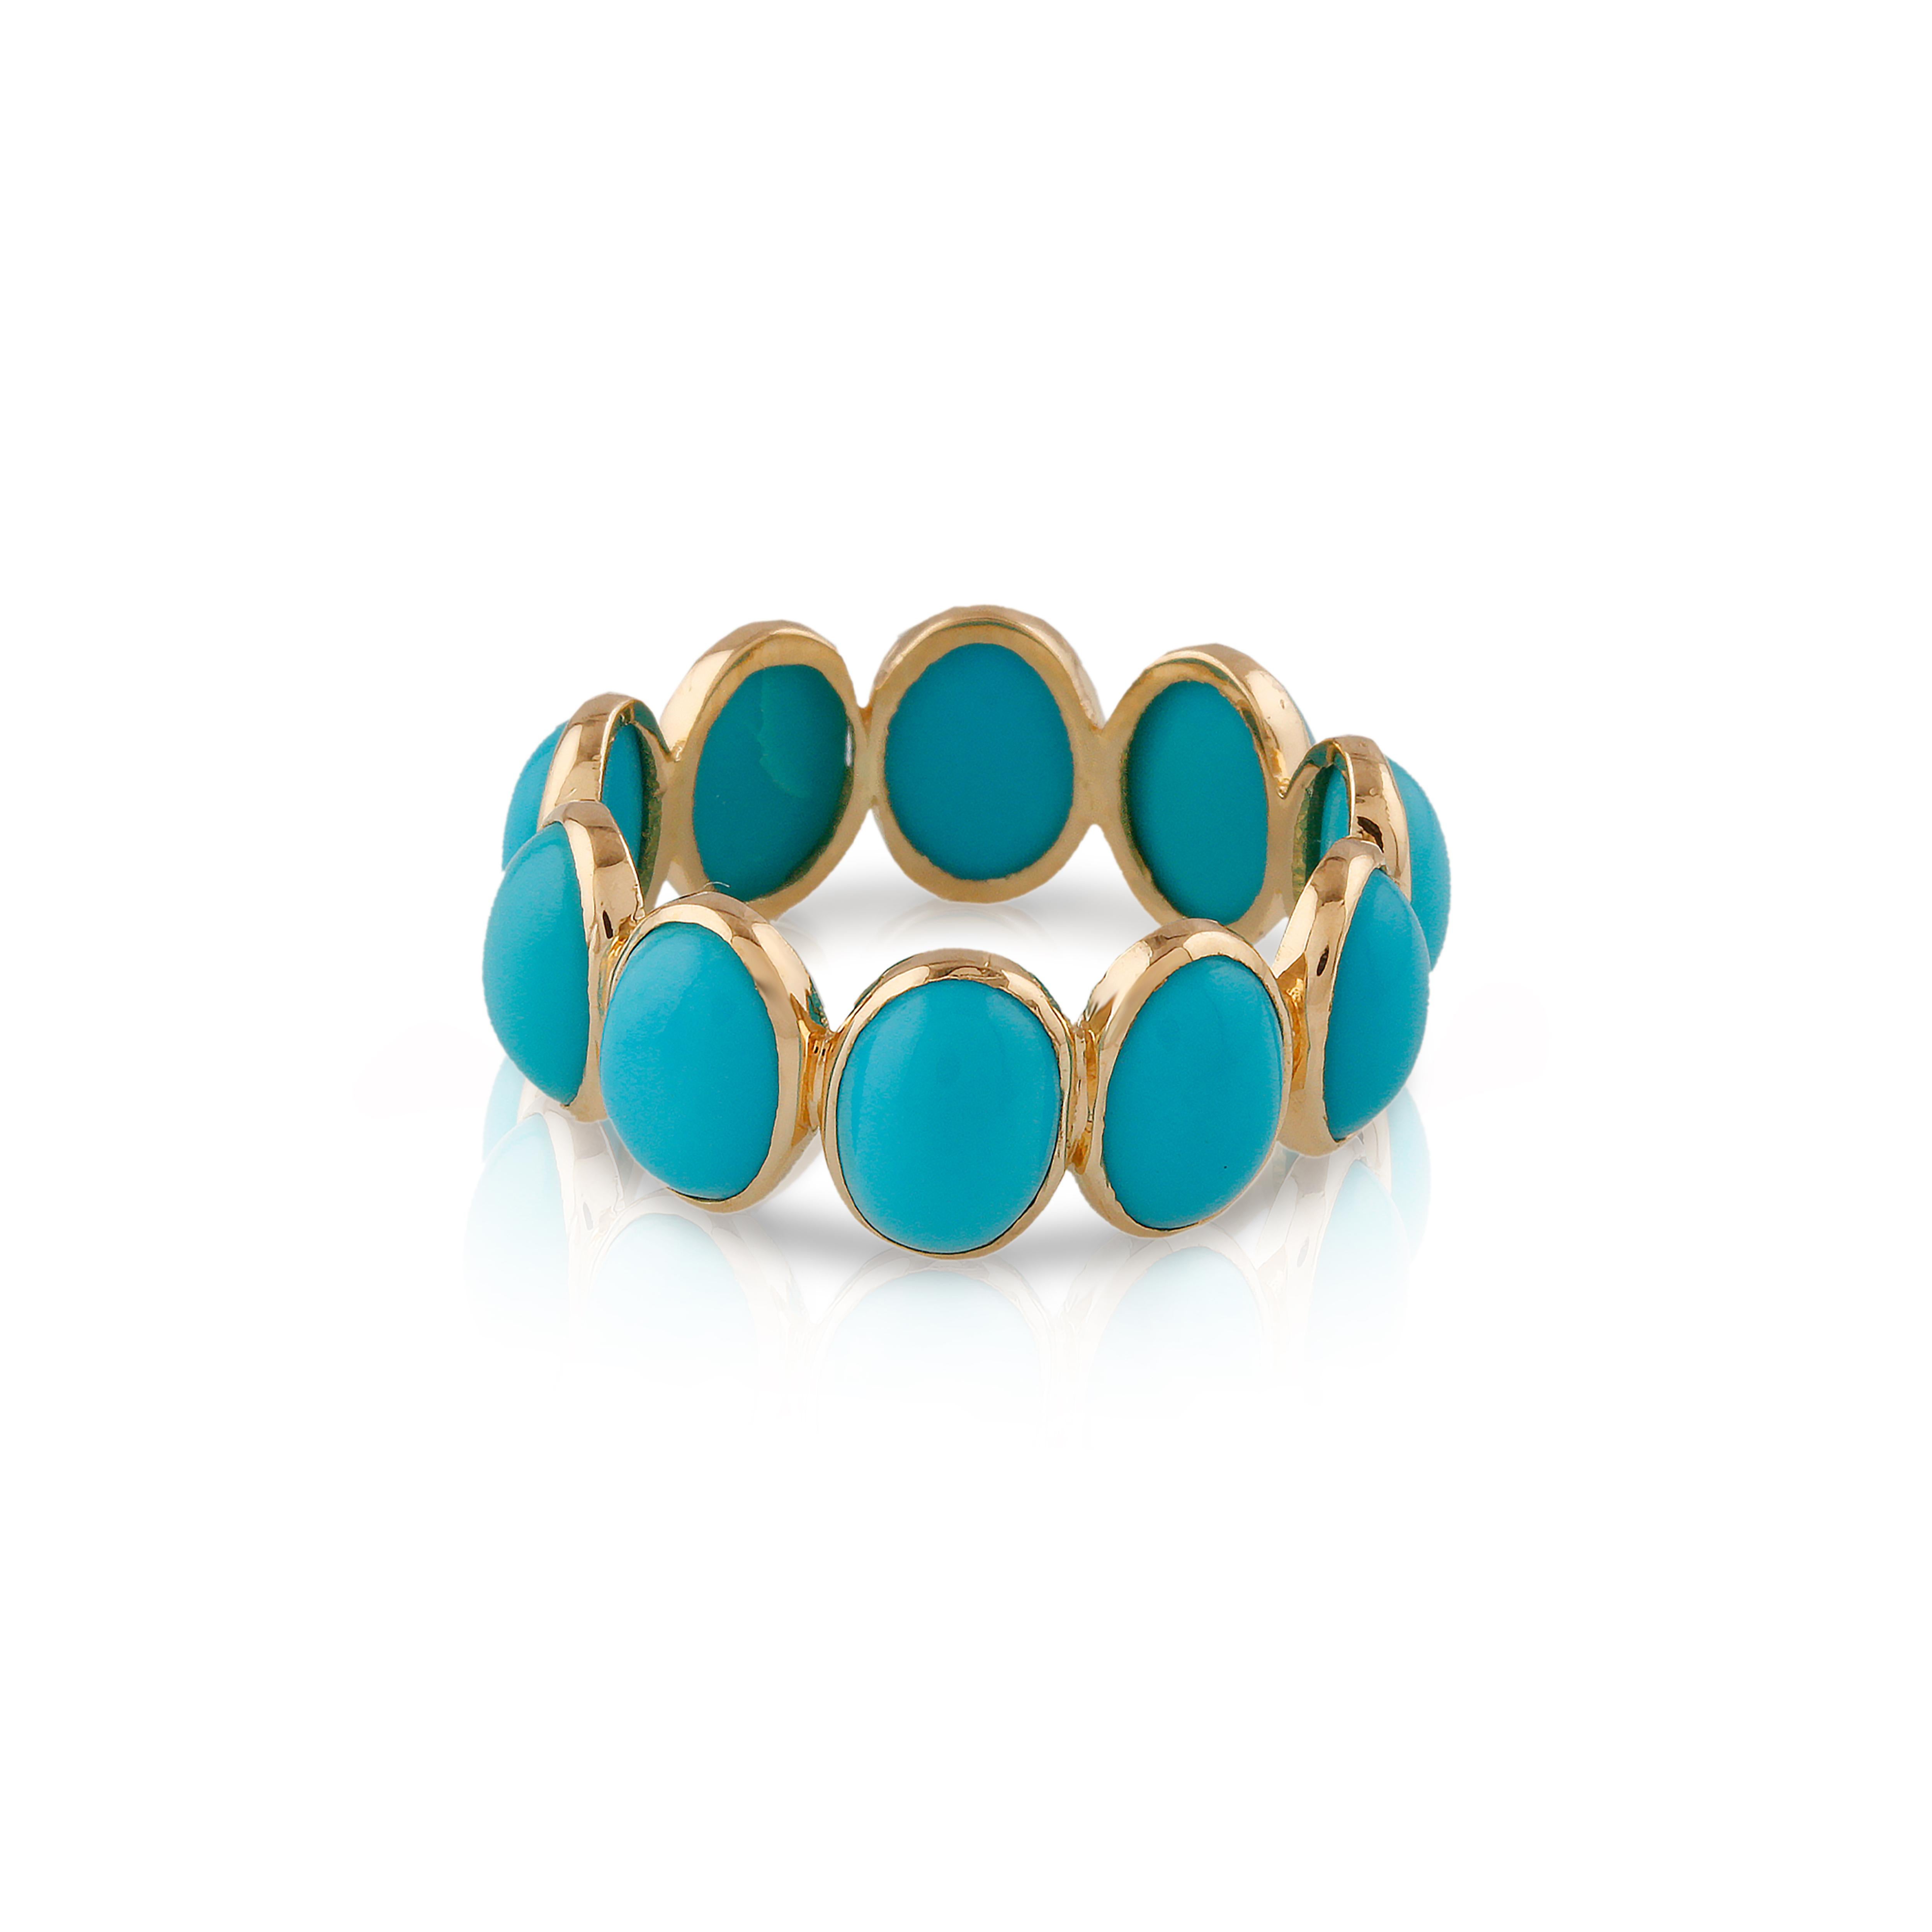 Tresor Beautiful Ring feature 6.25 carats of Turquoise. The Ring are an ode to the luxurious yet classic beauty with sparkly gemstones and feminine hues. Their contemporary and modern design make them perfect and versatile to be worn at any